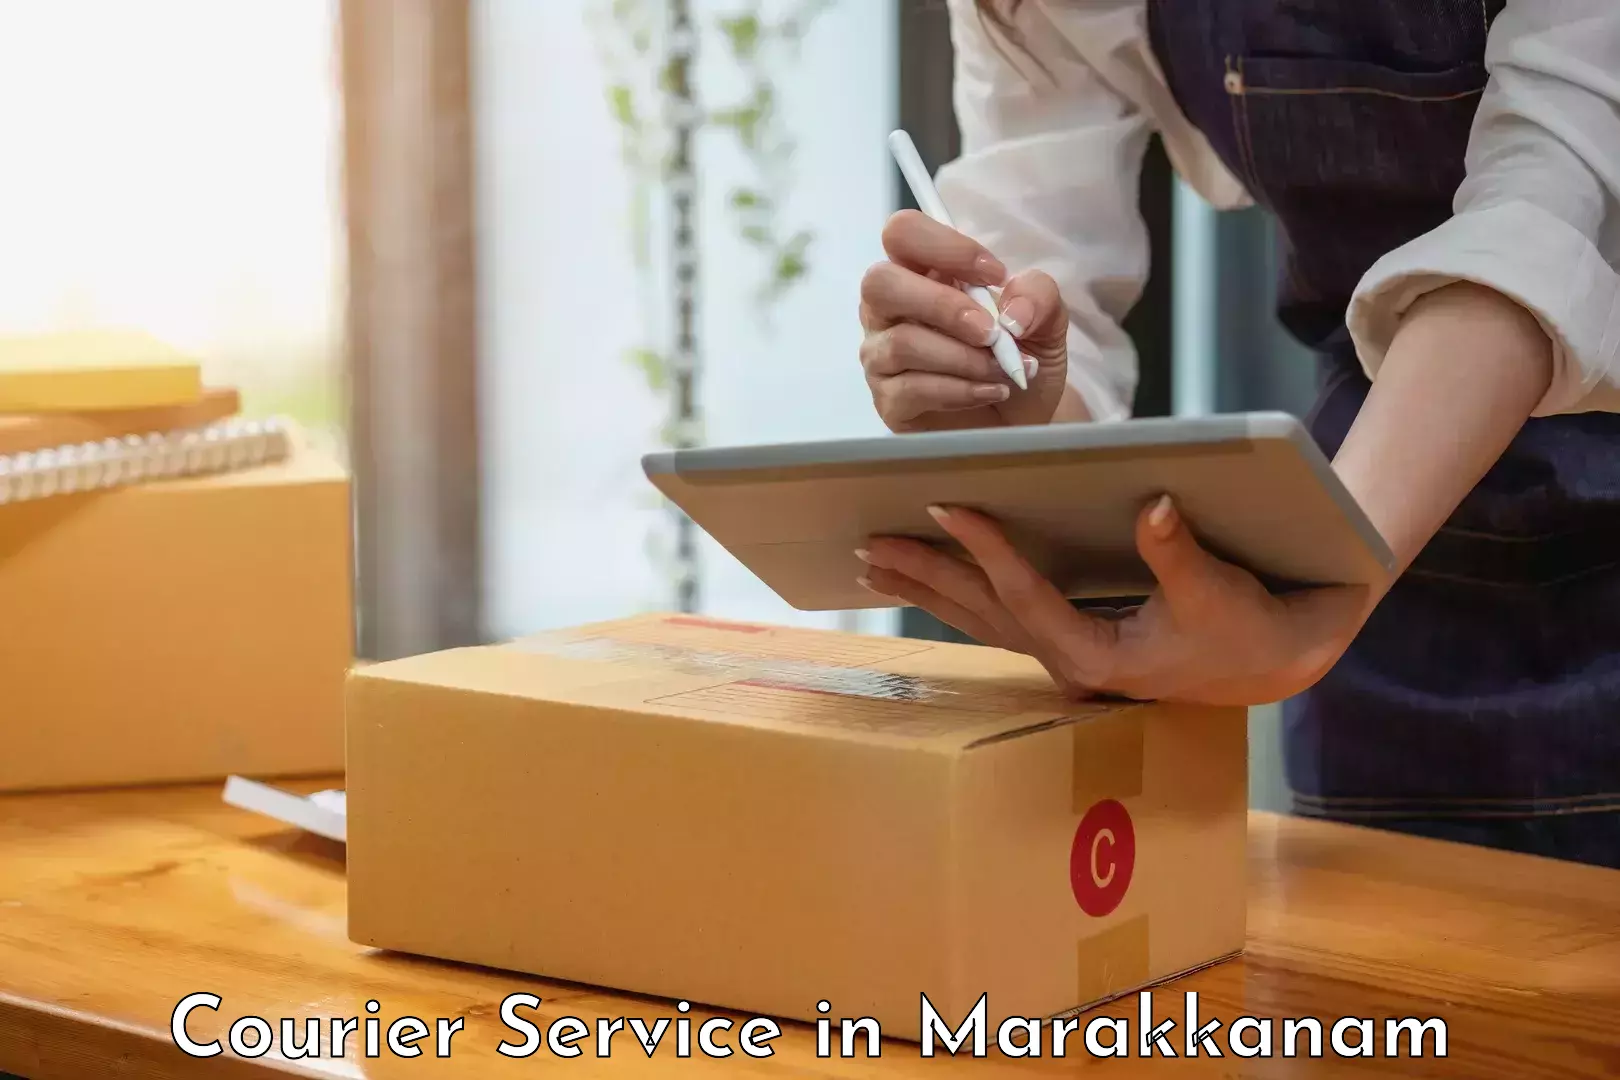 Same-day delivery solutions in Marakkanam